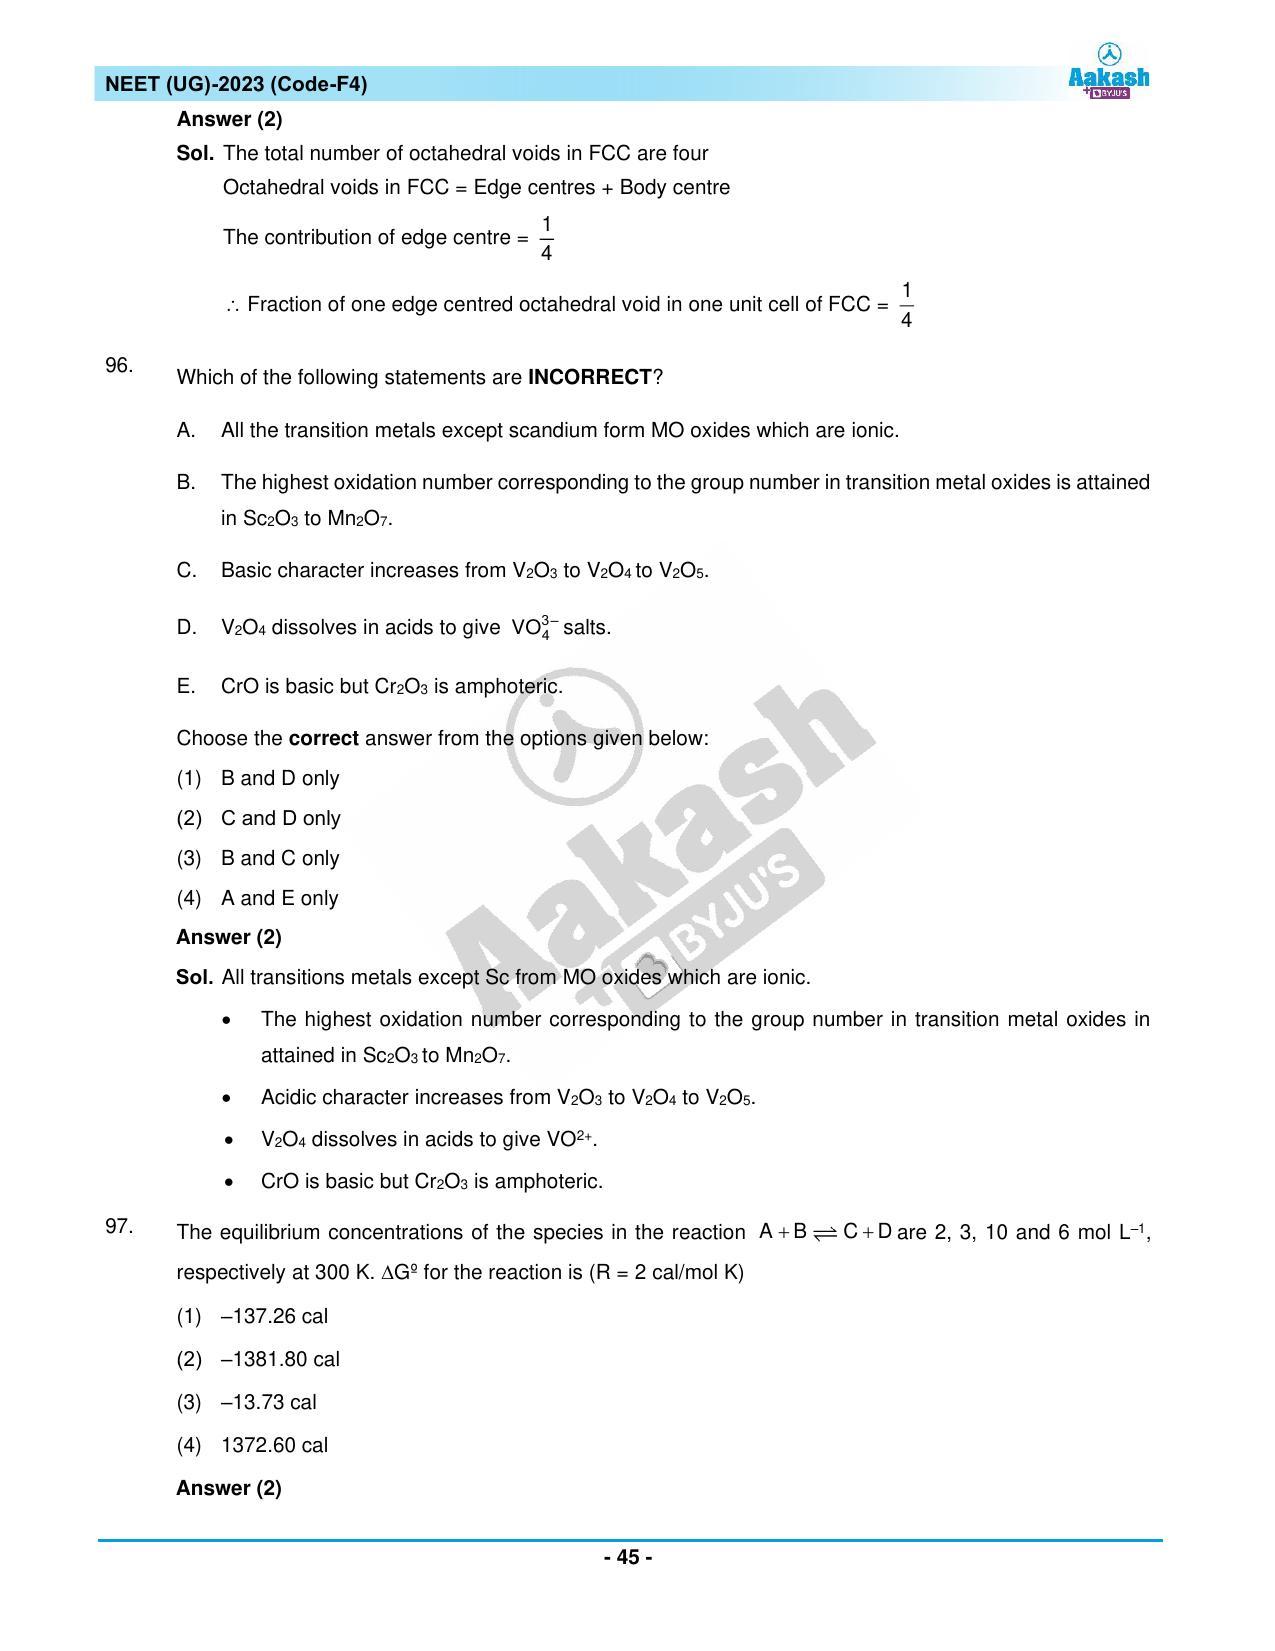 NEET 2023 Question Paper F4 - Page 45